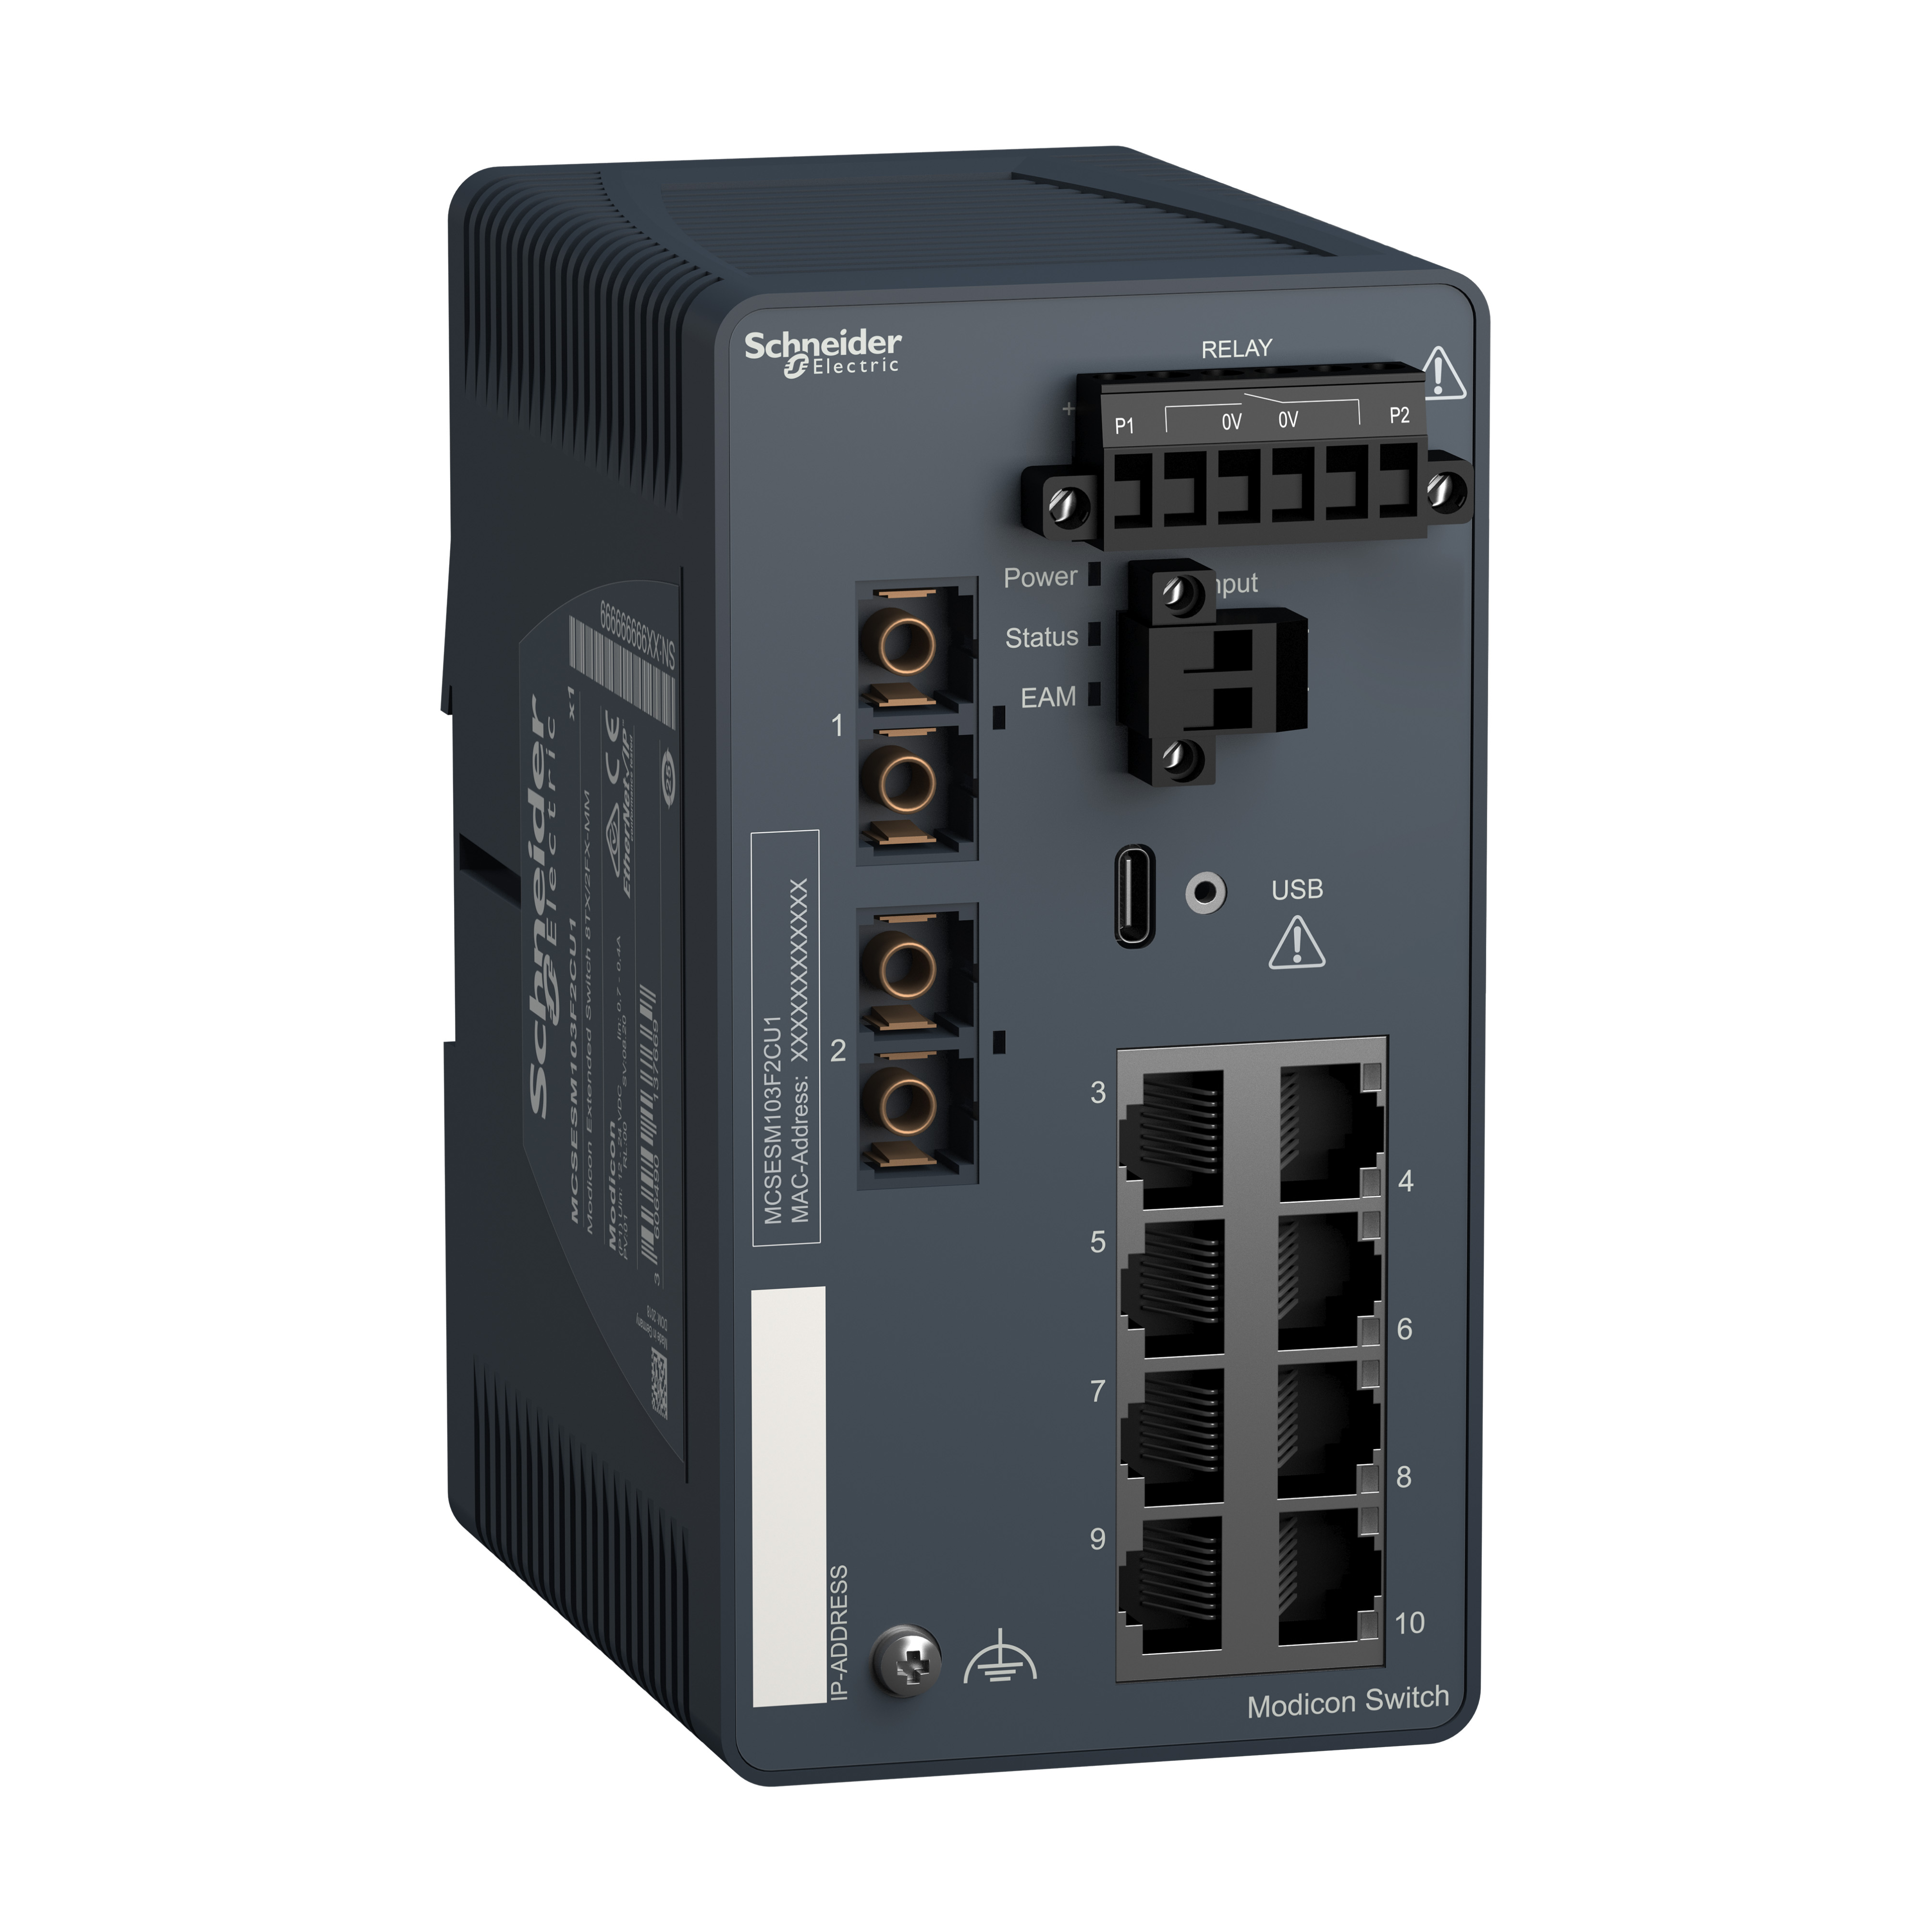 Modicon Extended Managed Switch - 8 ports for copper + 2 ports for fiber optic multimode